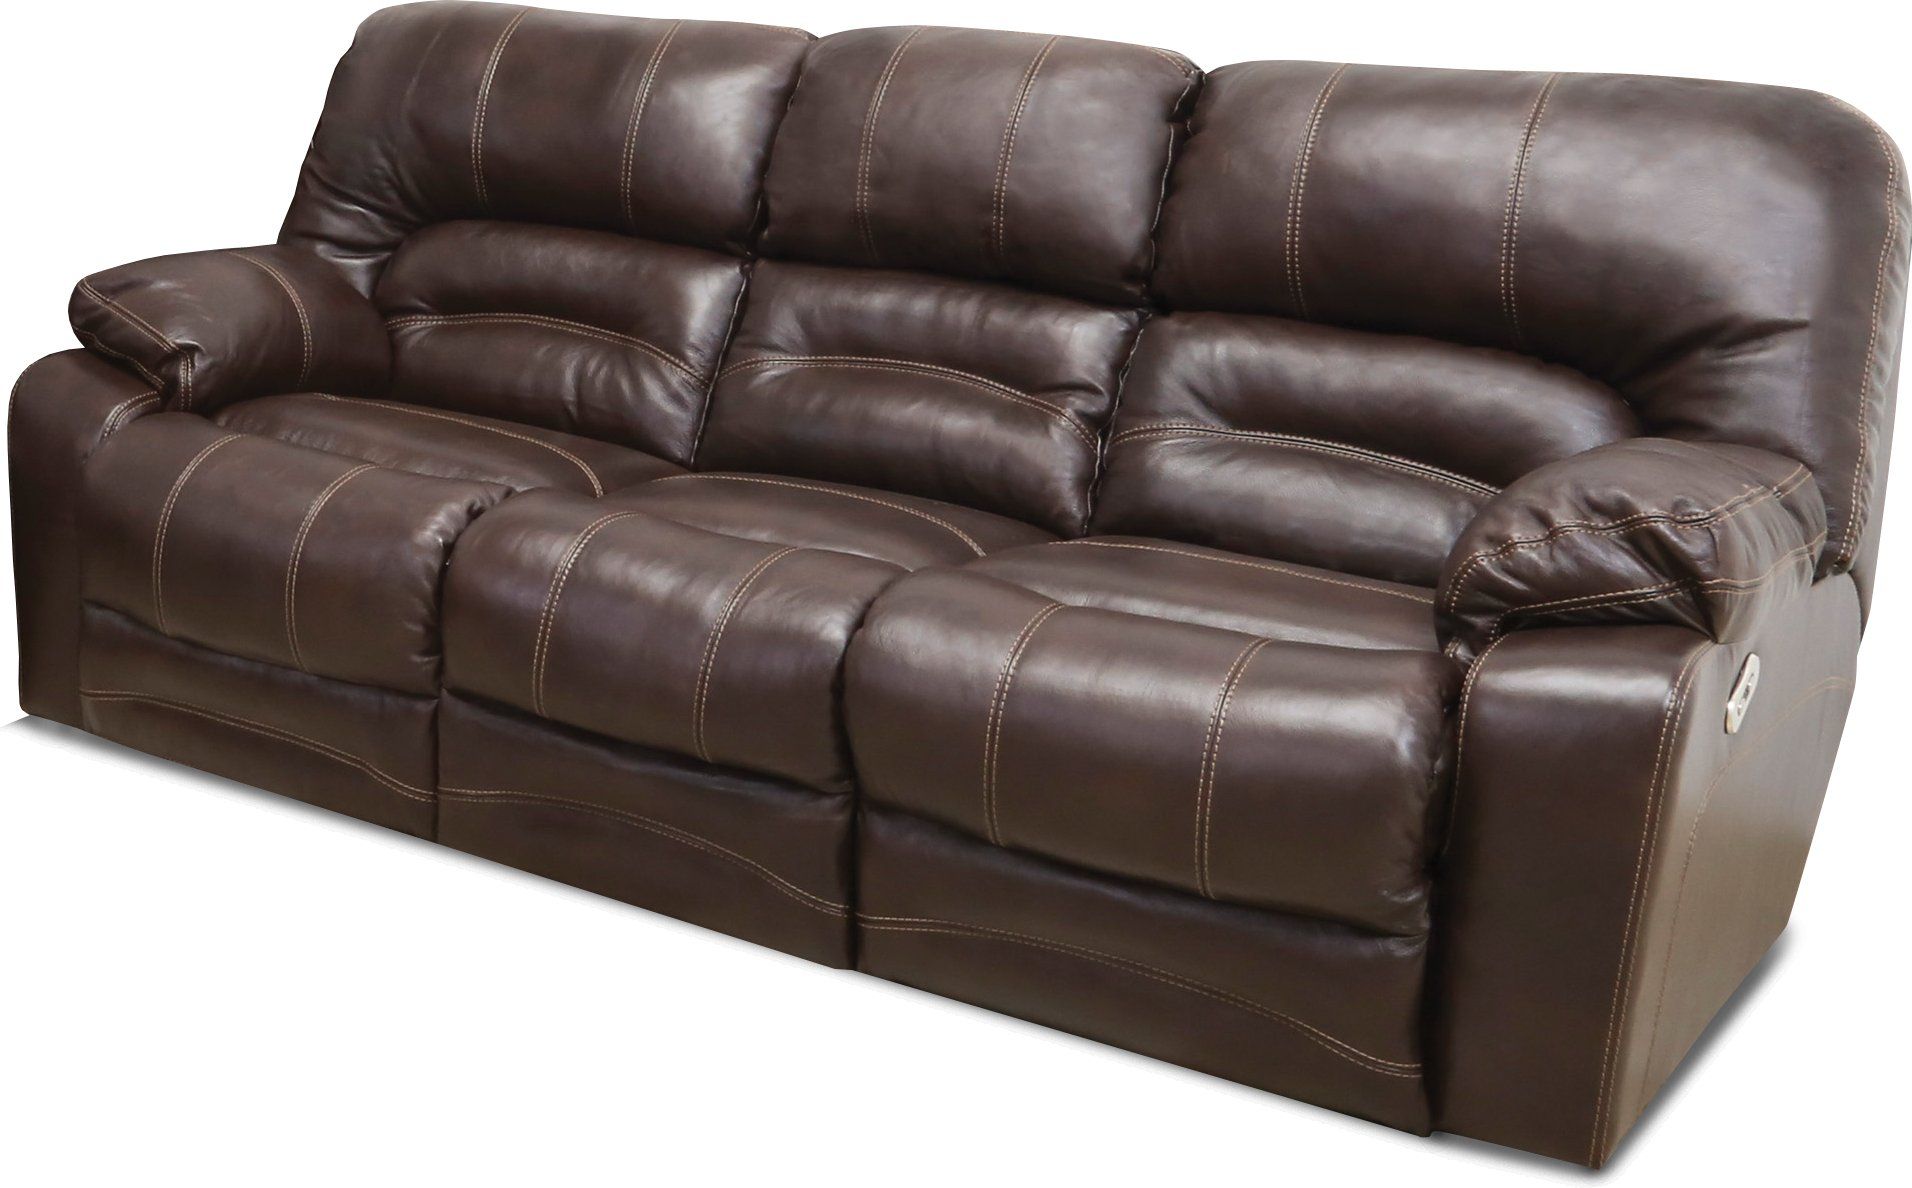 Chocolate Brown Leather Power Reclining Sofa & Loveseat – Legacy | Rc Intended For Faux Leather Sofas In Chocolate Brown (View 20 of 20)